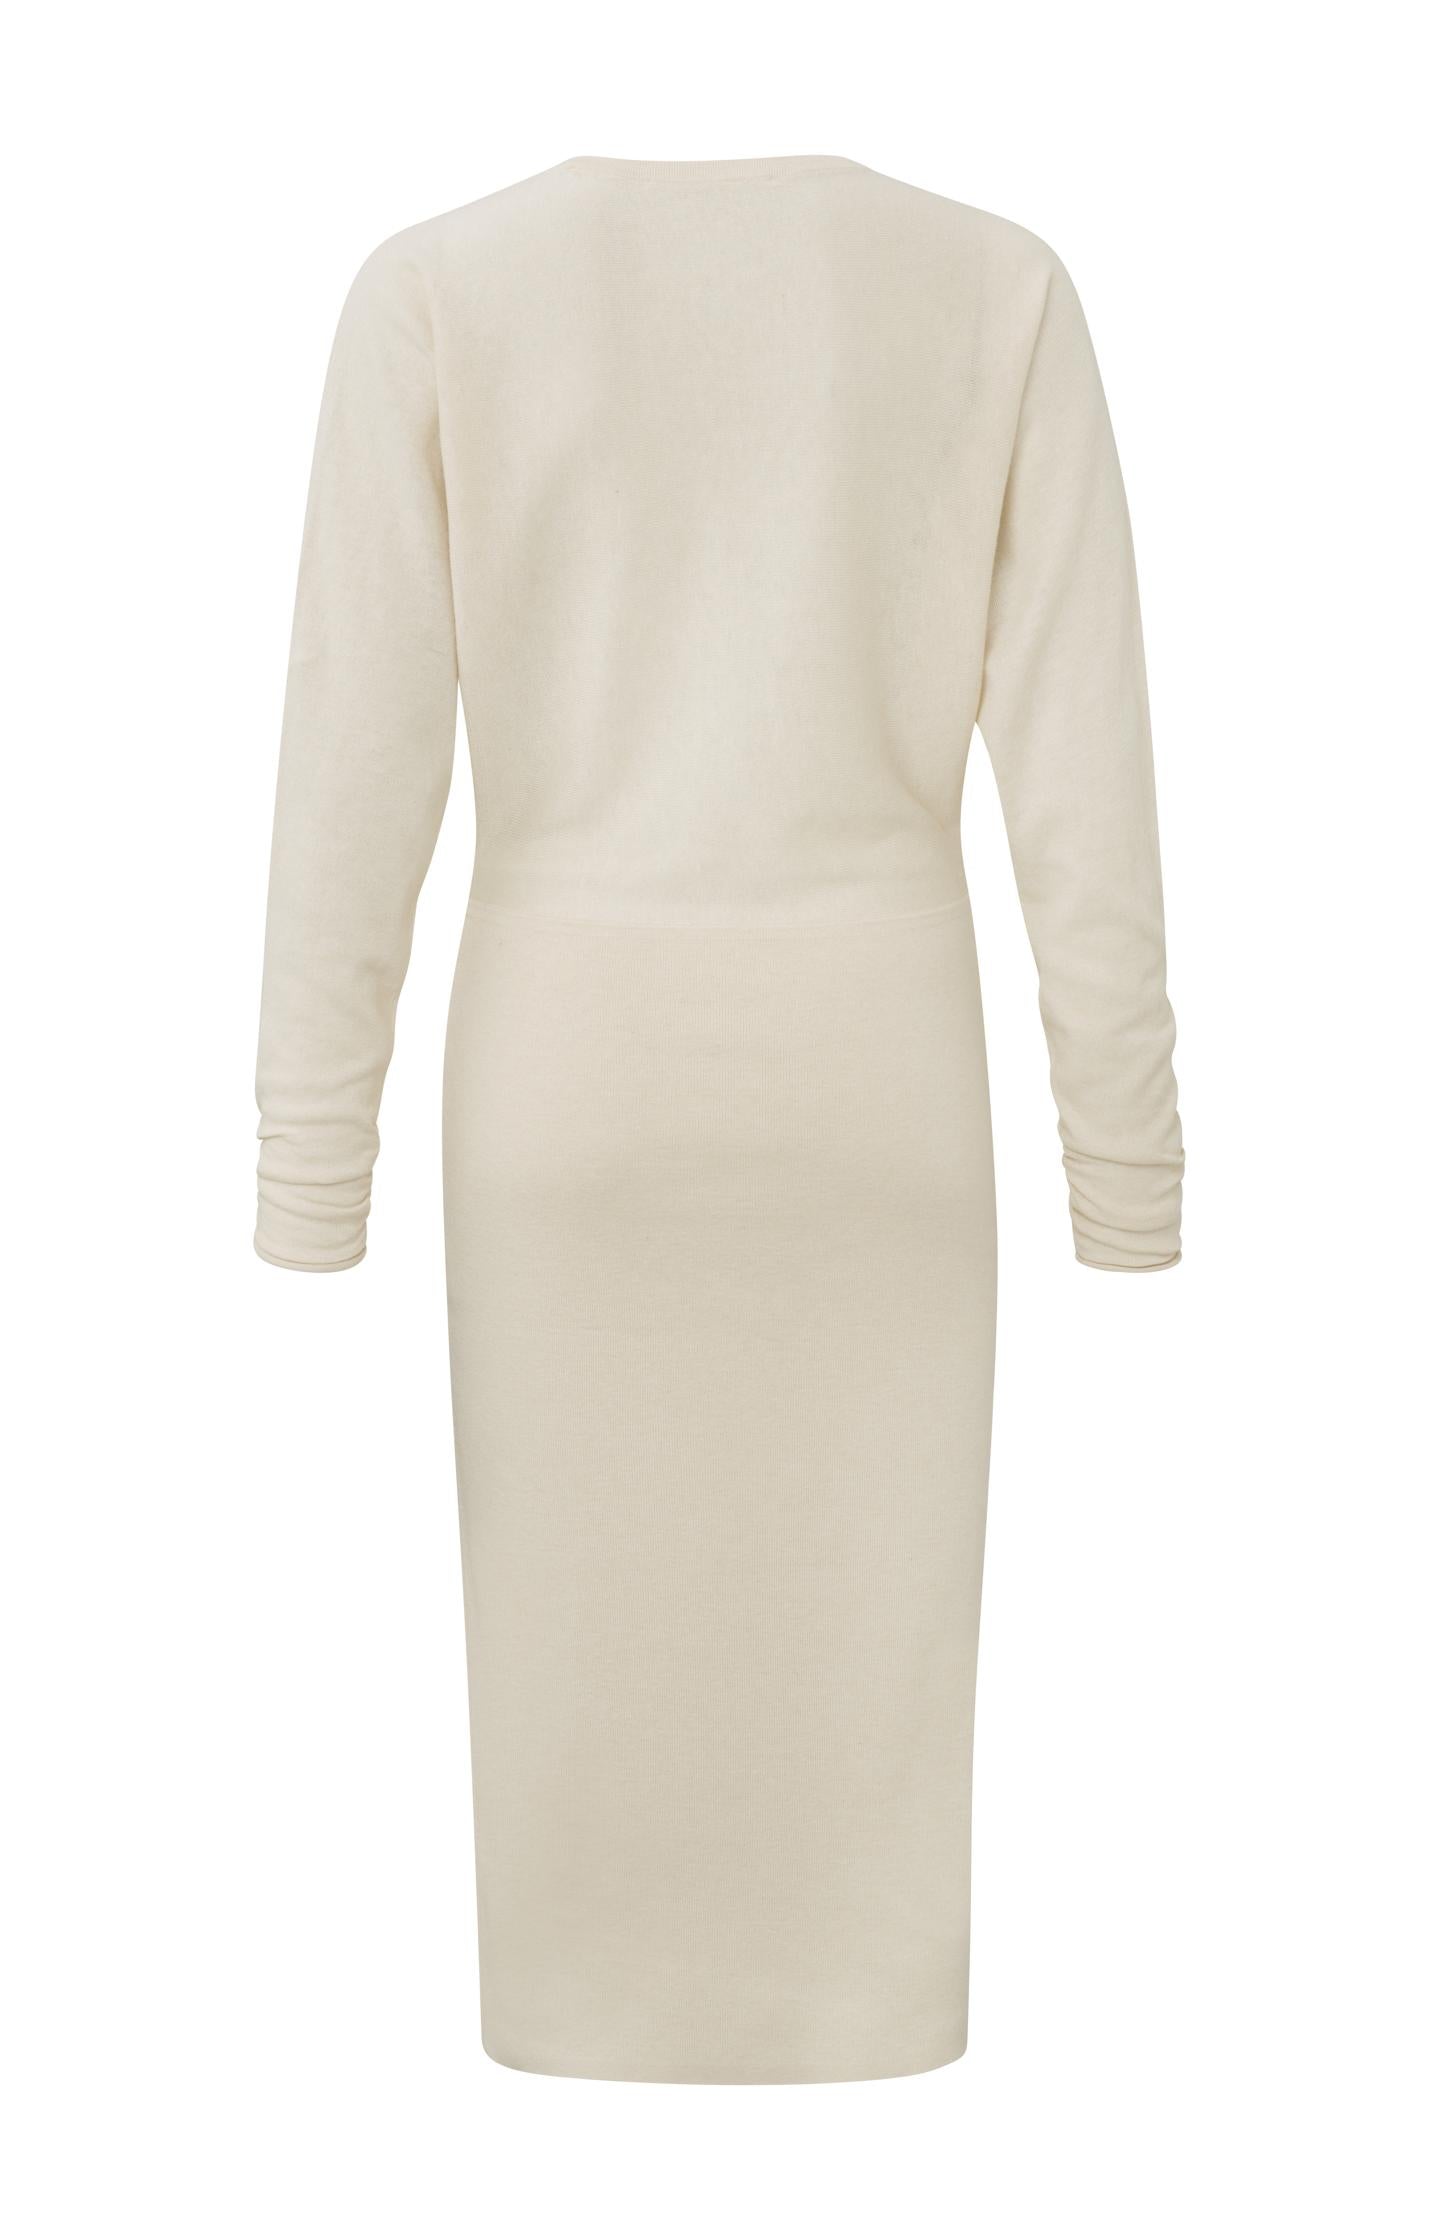 Midi dress with V-neck and long sleeves in a close fit